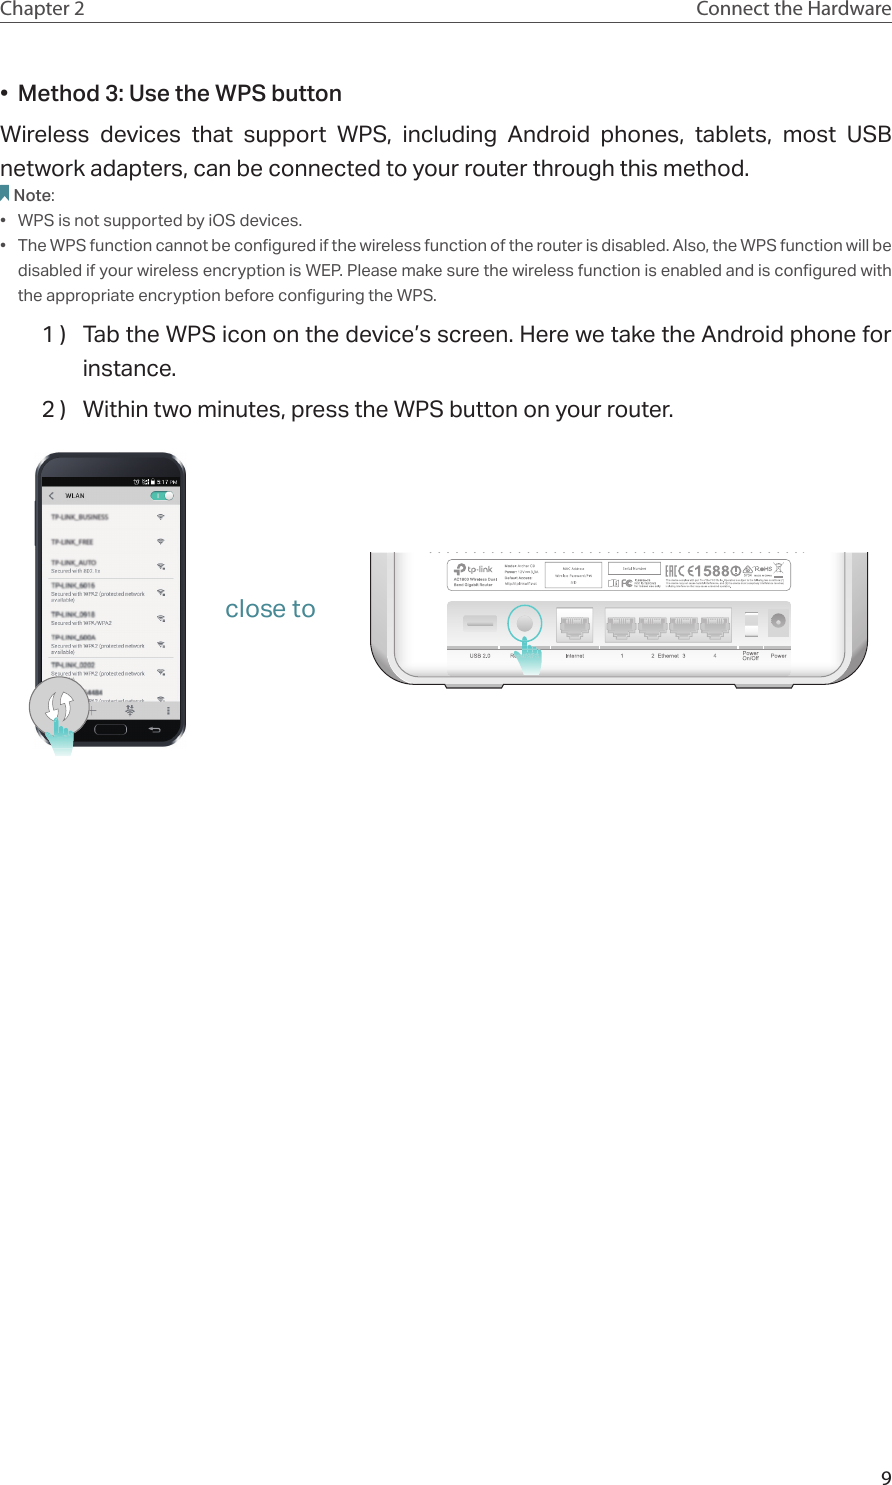 9Chapter 2 Connect the Hardware•  Method 3: Use the WPS buttonWireless devices that support WPS, including Android phones, tablets, most USB network adapters, can be connected to your router through this method.Note:•  WPS is not supported by iOS devices.•  The WPS function cannot be configured if the wireless function of the router is disabled. Also, the WPS function will be disabled if your wireless encryption is WEP. Please make sure the wireless function is enabled and is configured with the appropriate encryption before configuring the WPS.1 )  Tab the WPS icon on the device’s screen. Here we take the Android phone for instance.2 )  Within two minutes, press the WPS button on your router. close to